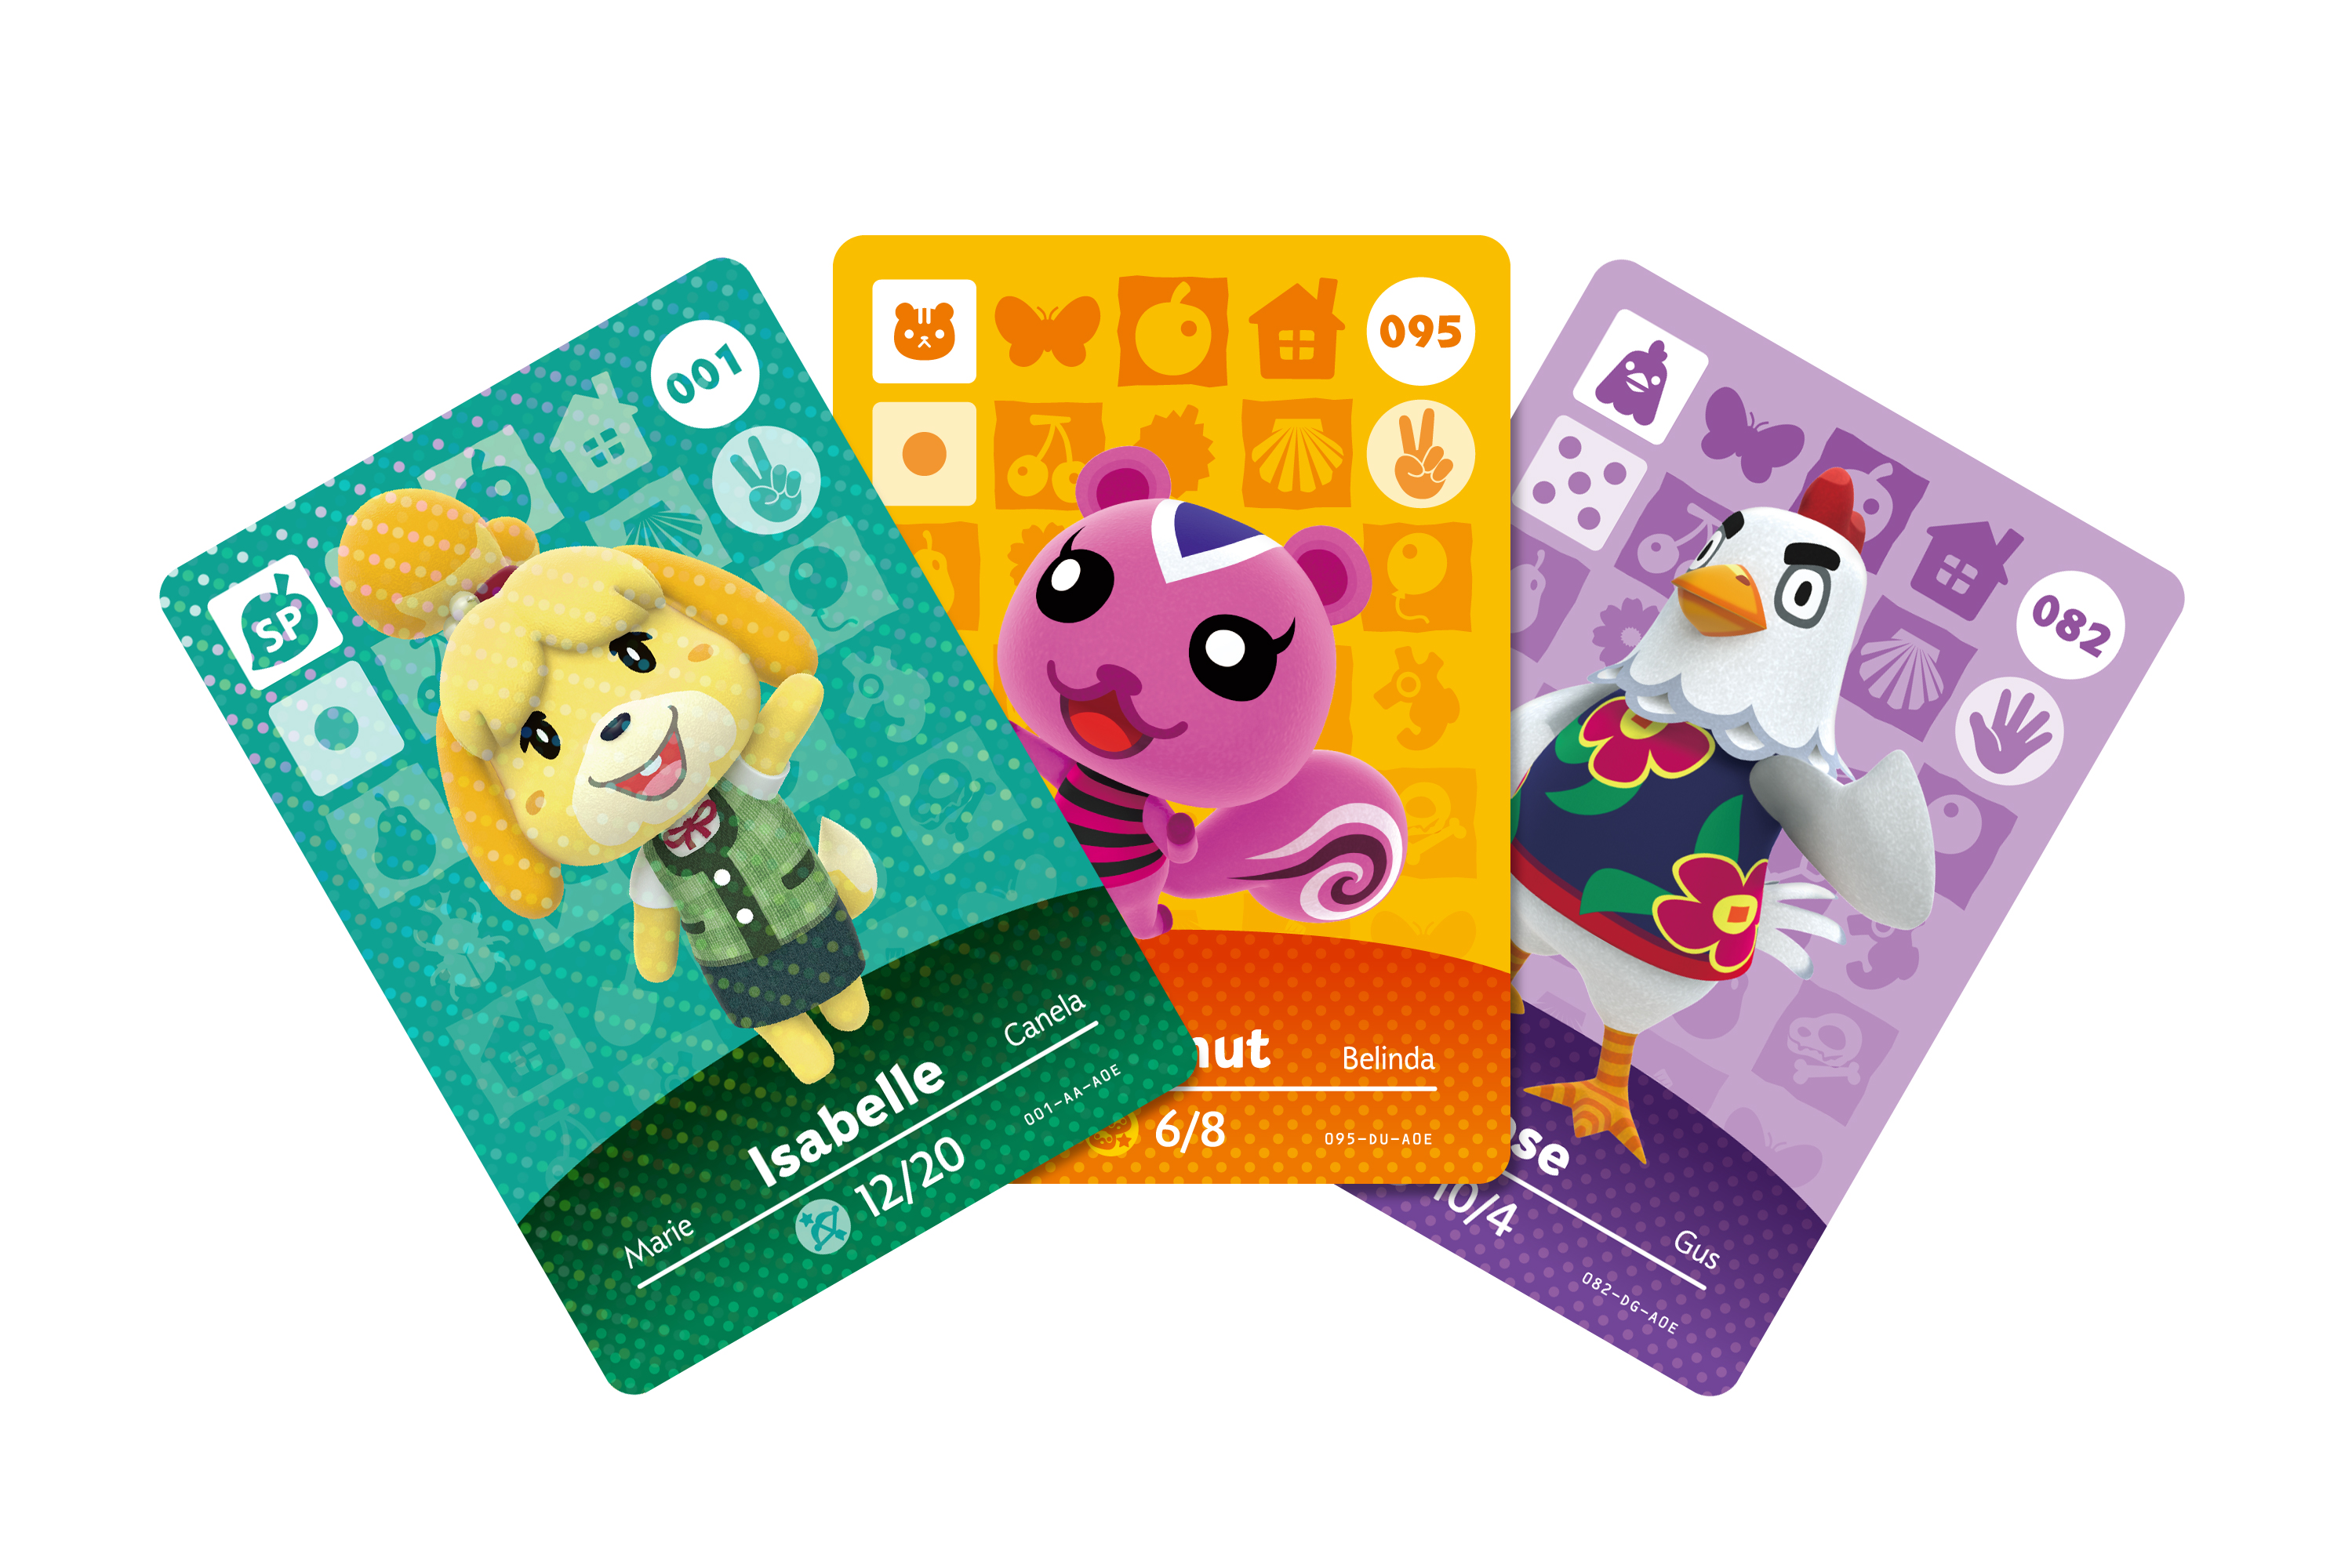 Nintendo of America on Twitter: "This November, #AnimalCrossing #amiibo  Cards Series 1-4 make their return to select retailers for $5.99 per pack.  Use the amiibo cards to Invite characters to live on